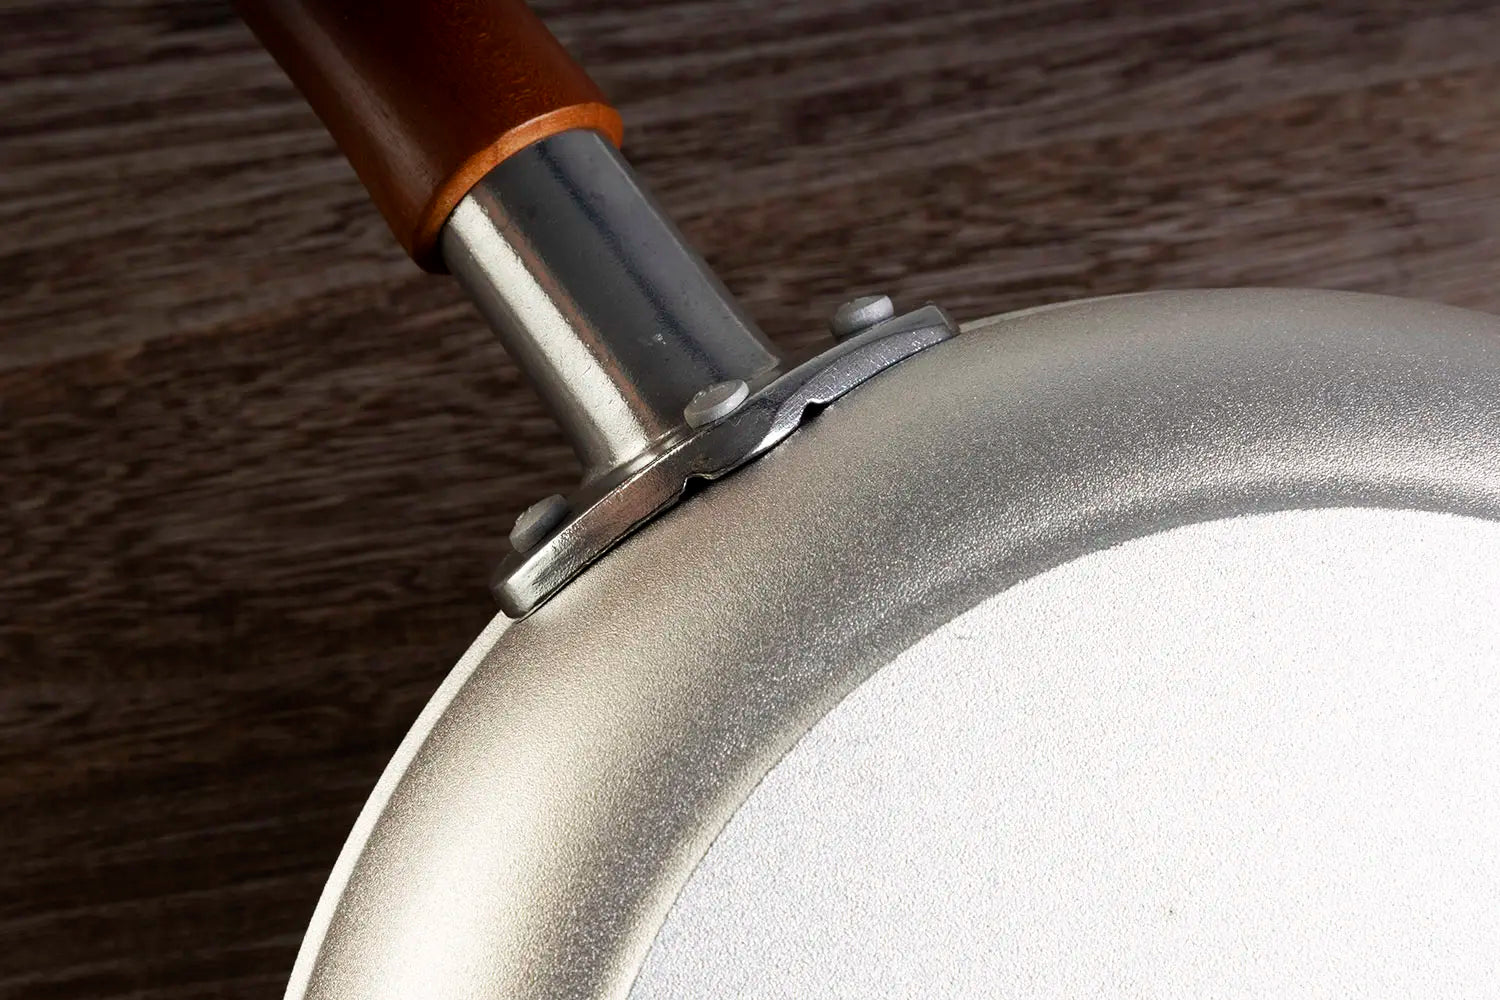 Closeup of the pan and handle